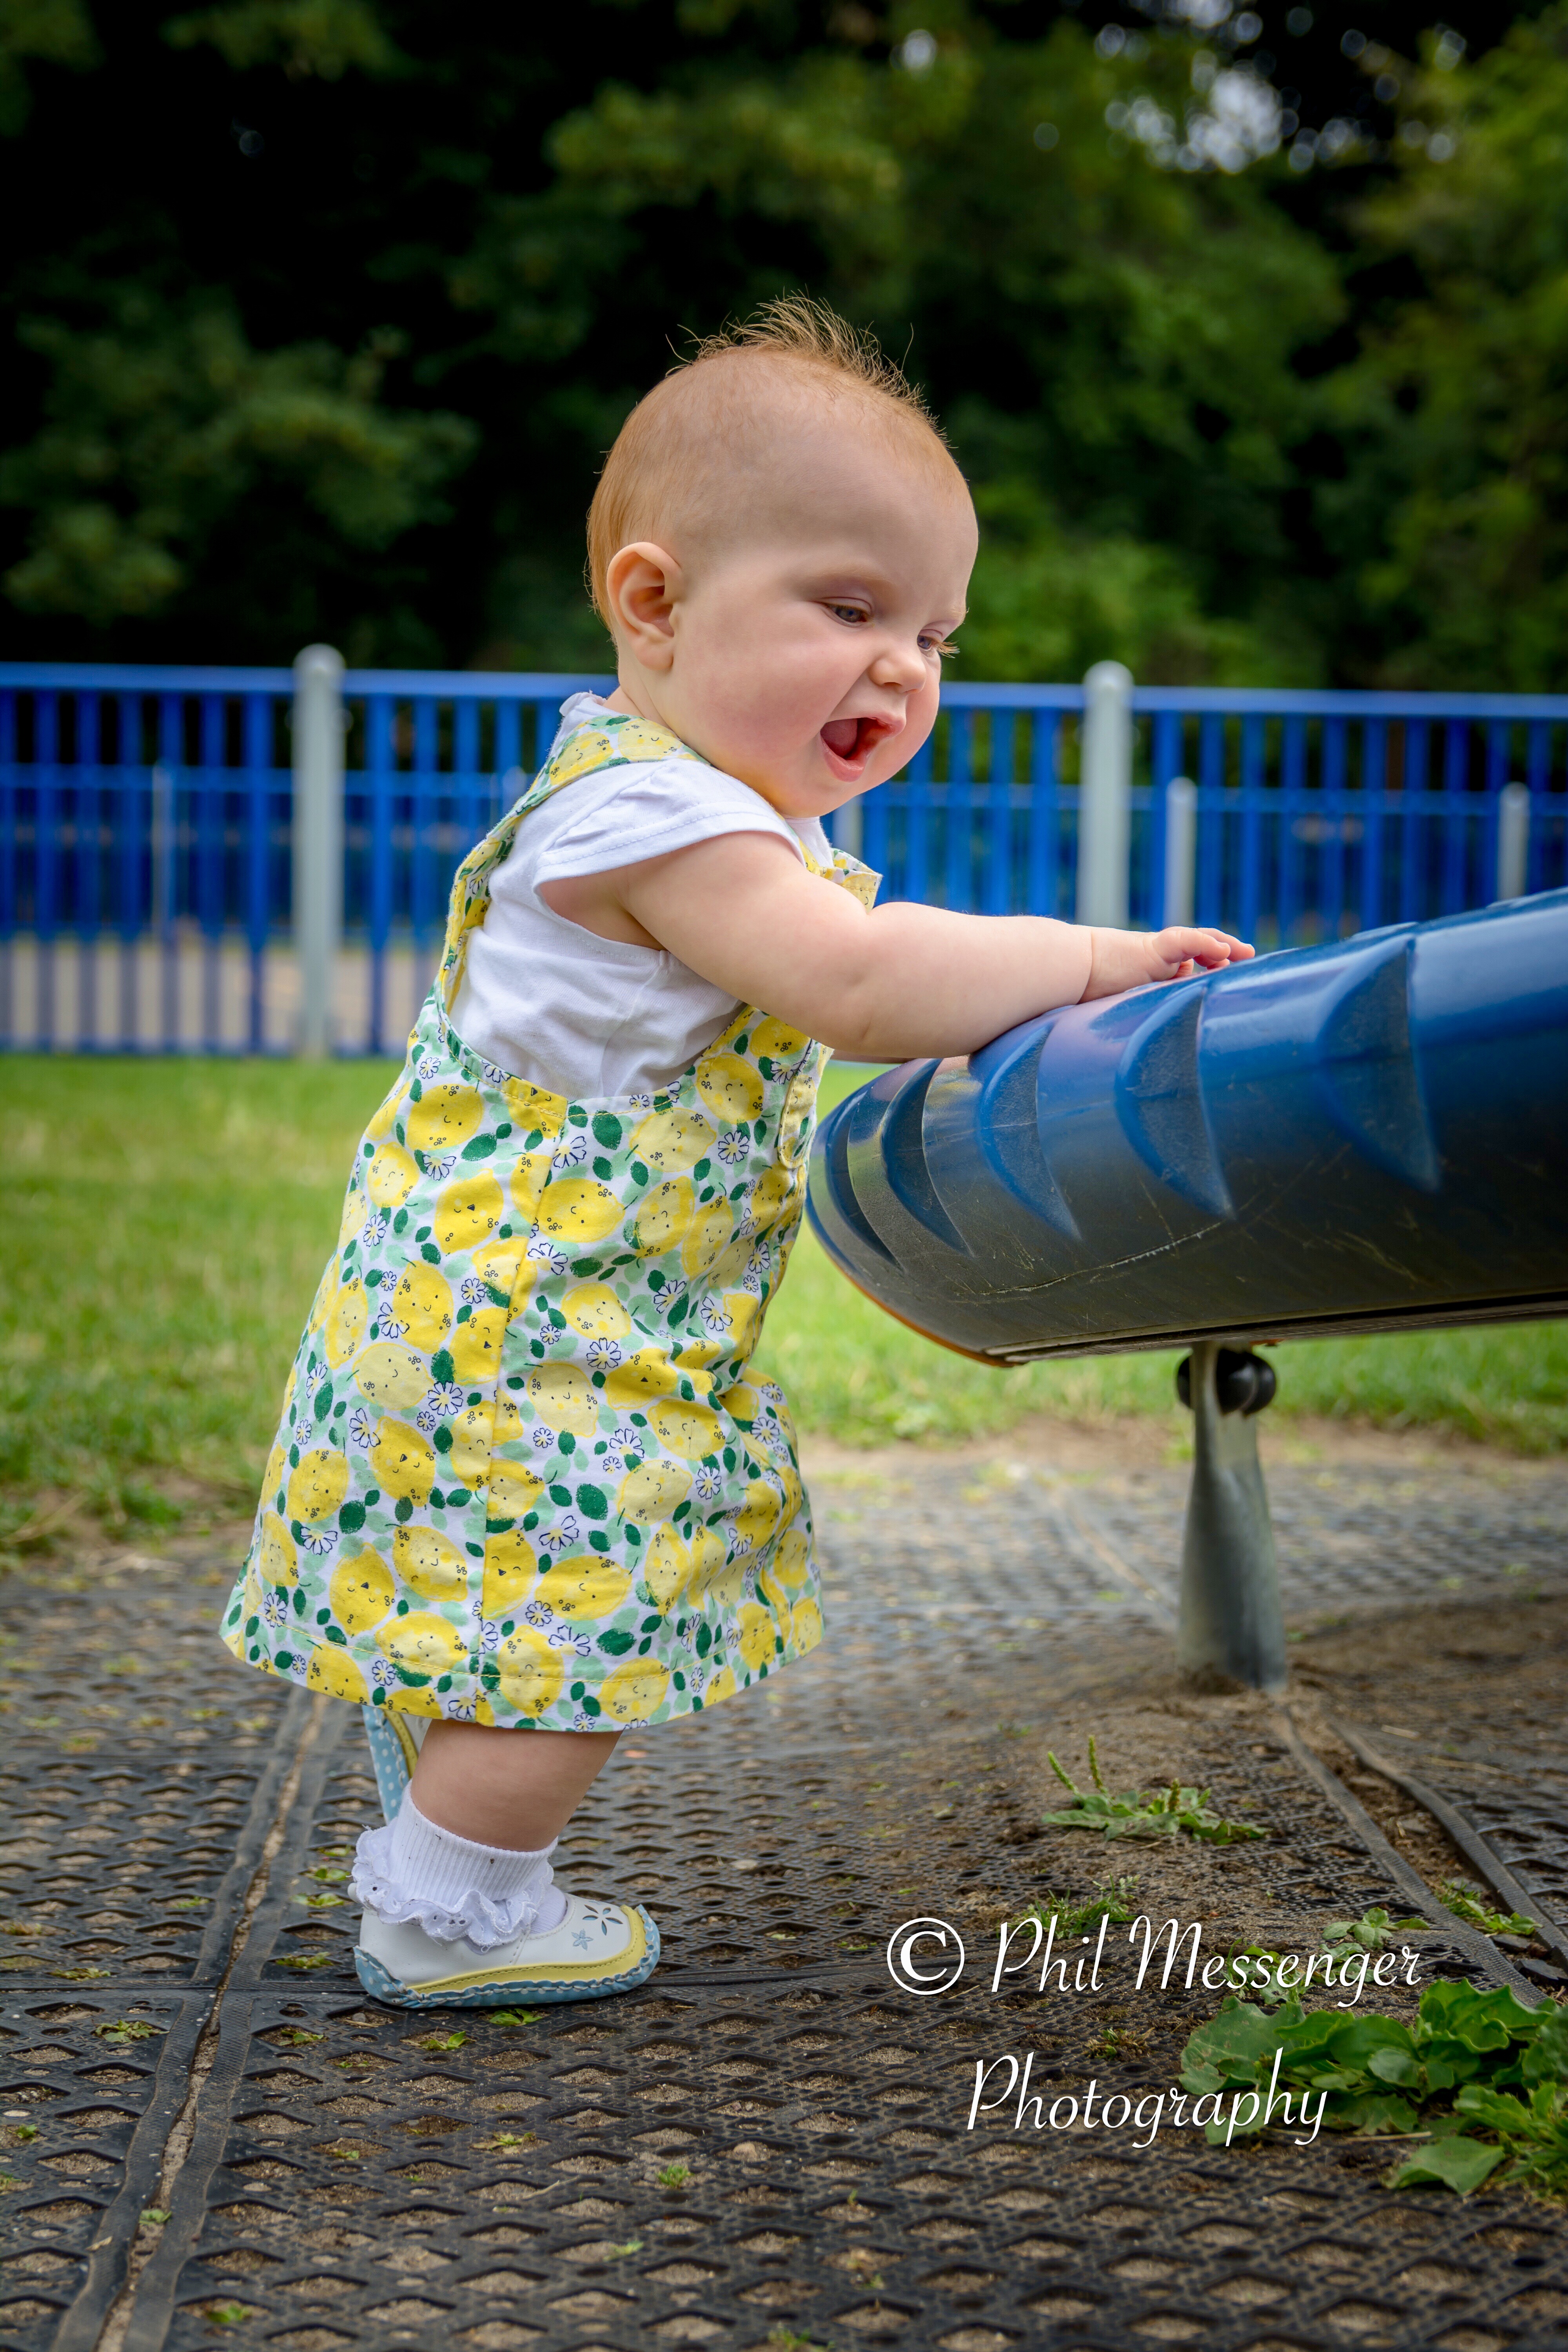 Autumn Rose finding her feet at the park